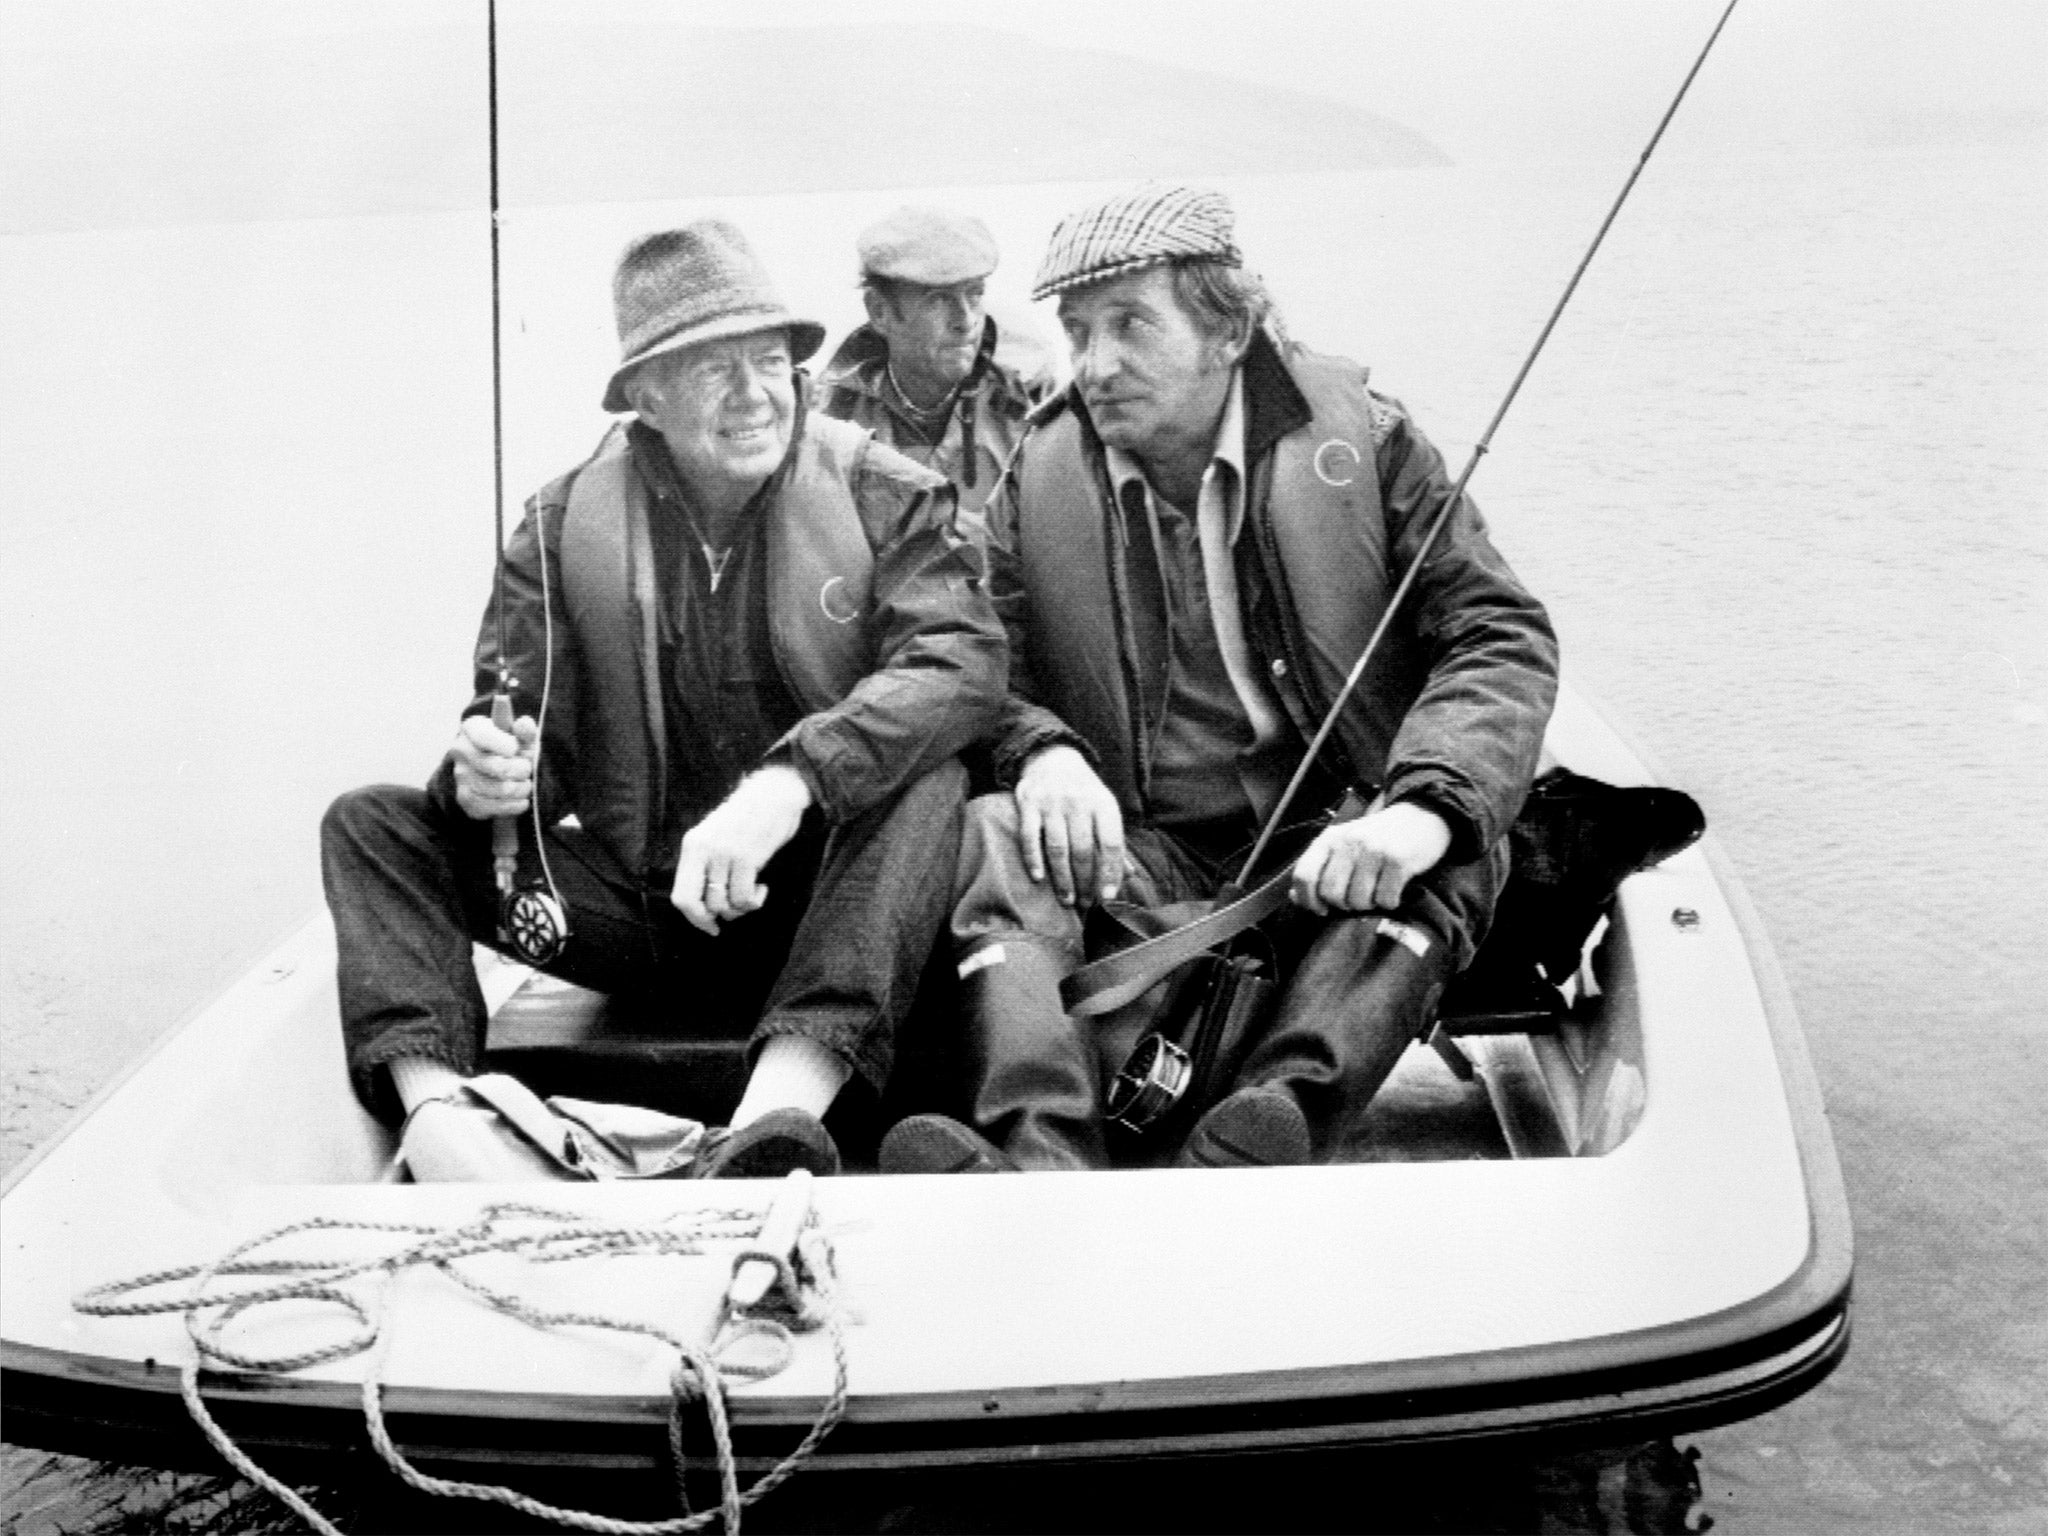 Morgan, right, with Jimmy Carter on Llyn Clywedog in mid-Wales in 1986